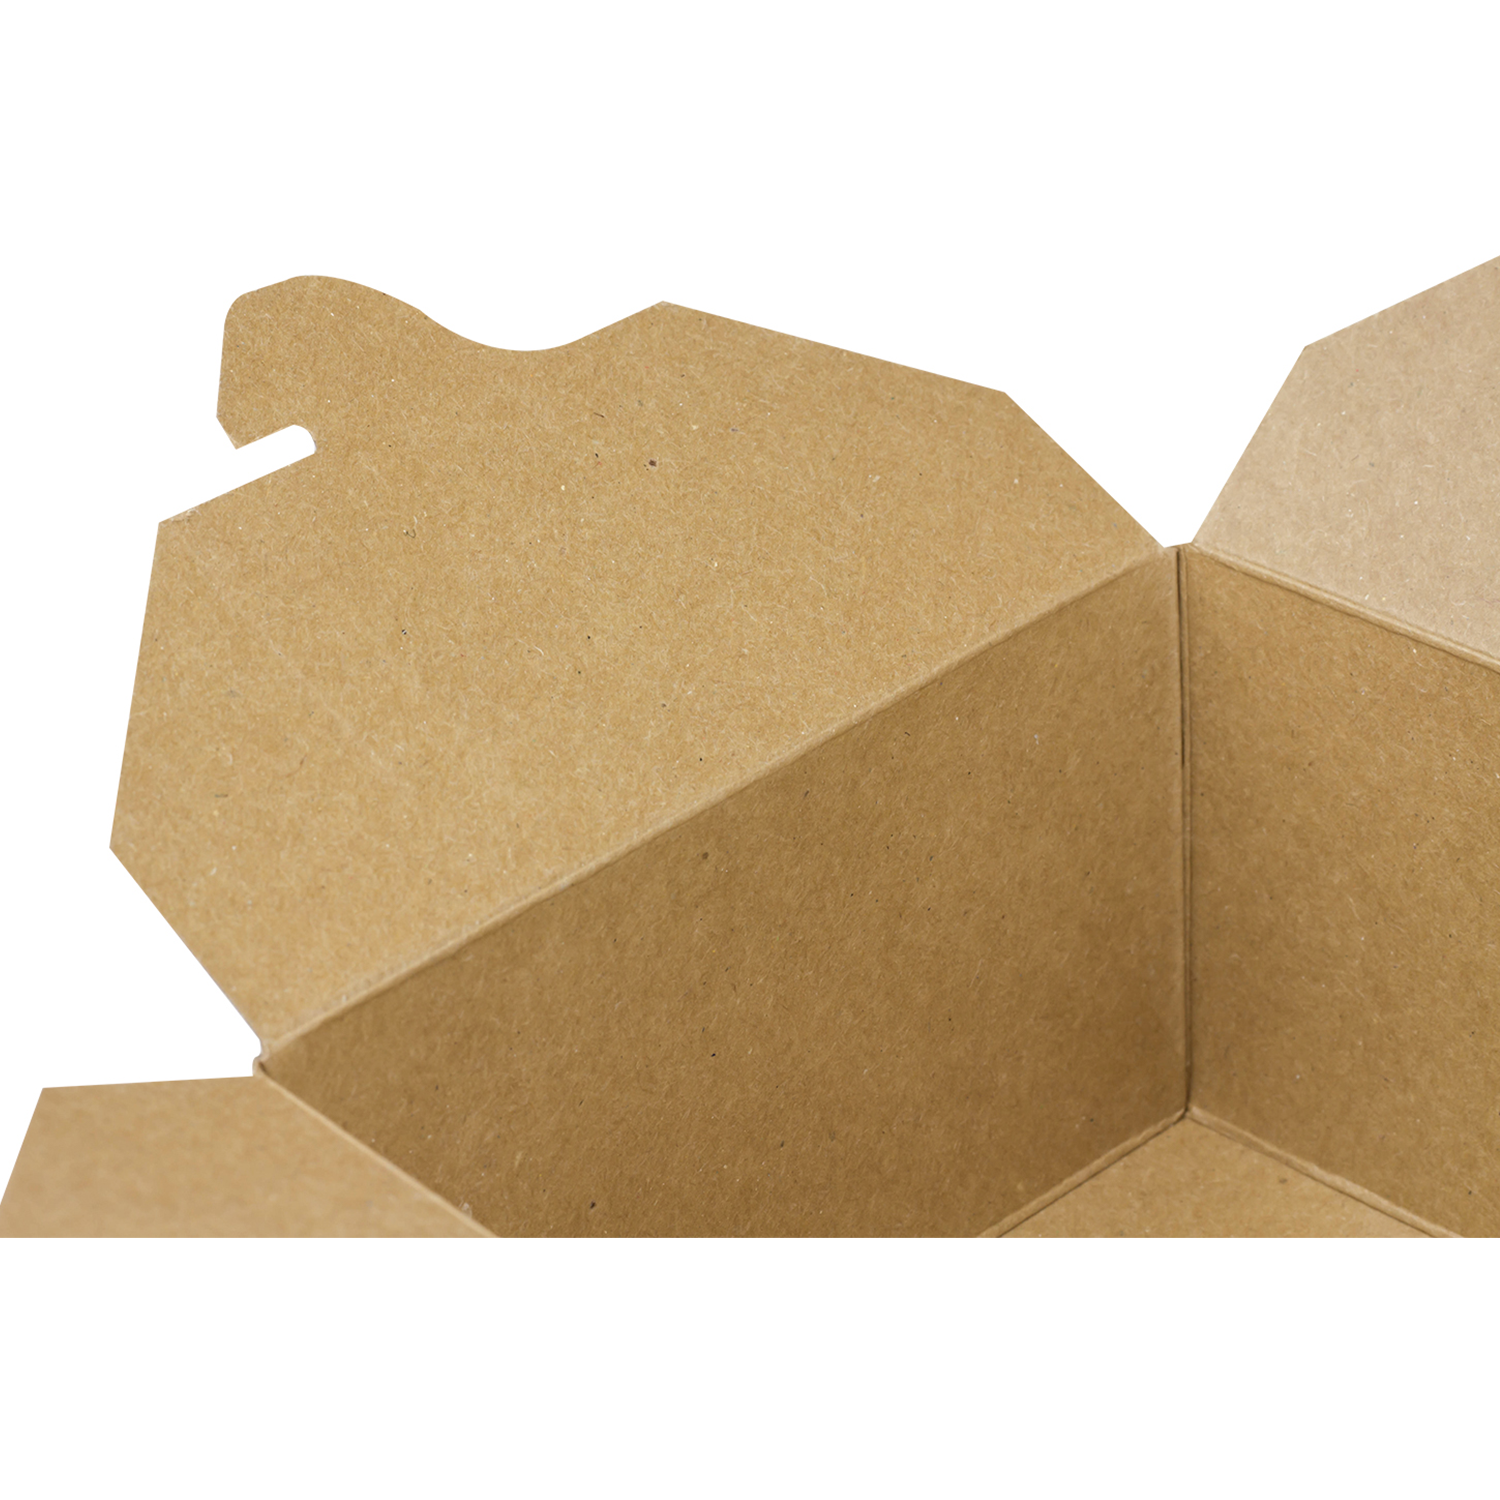 We have the best prices and Premium White Microwavable Folded Paper #1 Takeout  Boxes - Karat Small Fold-To-Go Container - 30oz - 4.3 X 3.5 X 2.4 - 450  Count Karat on our website